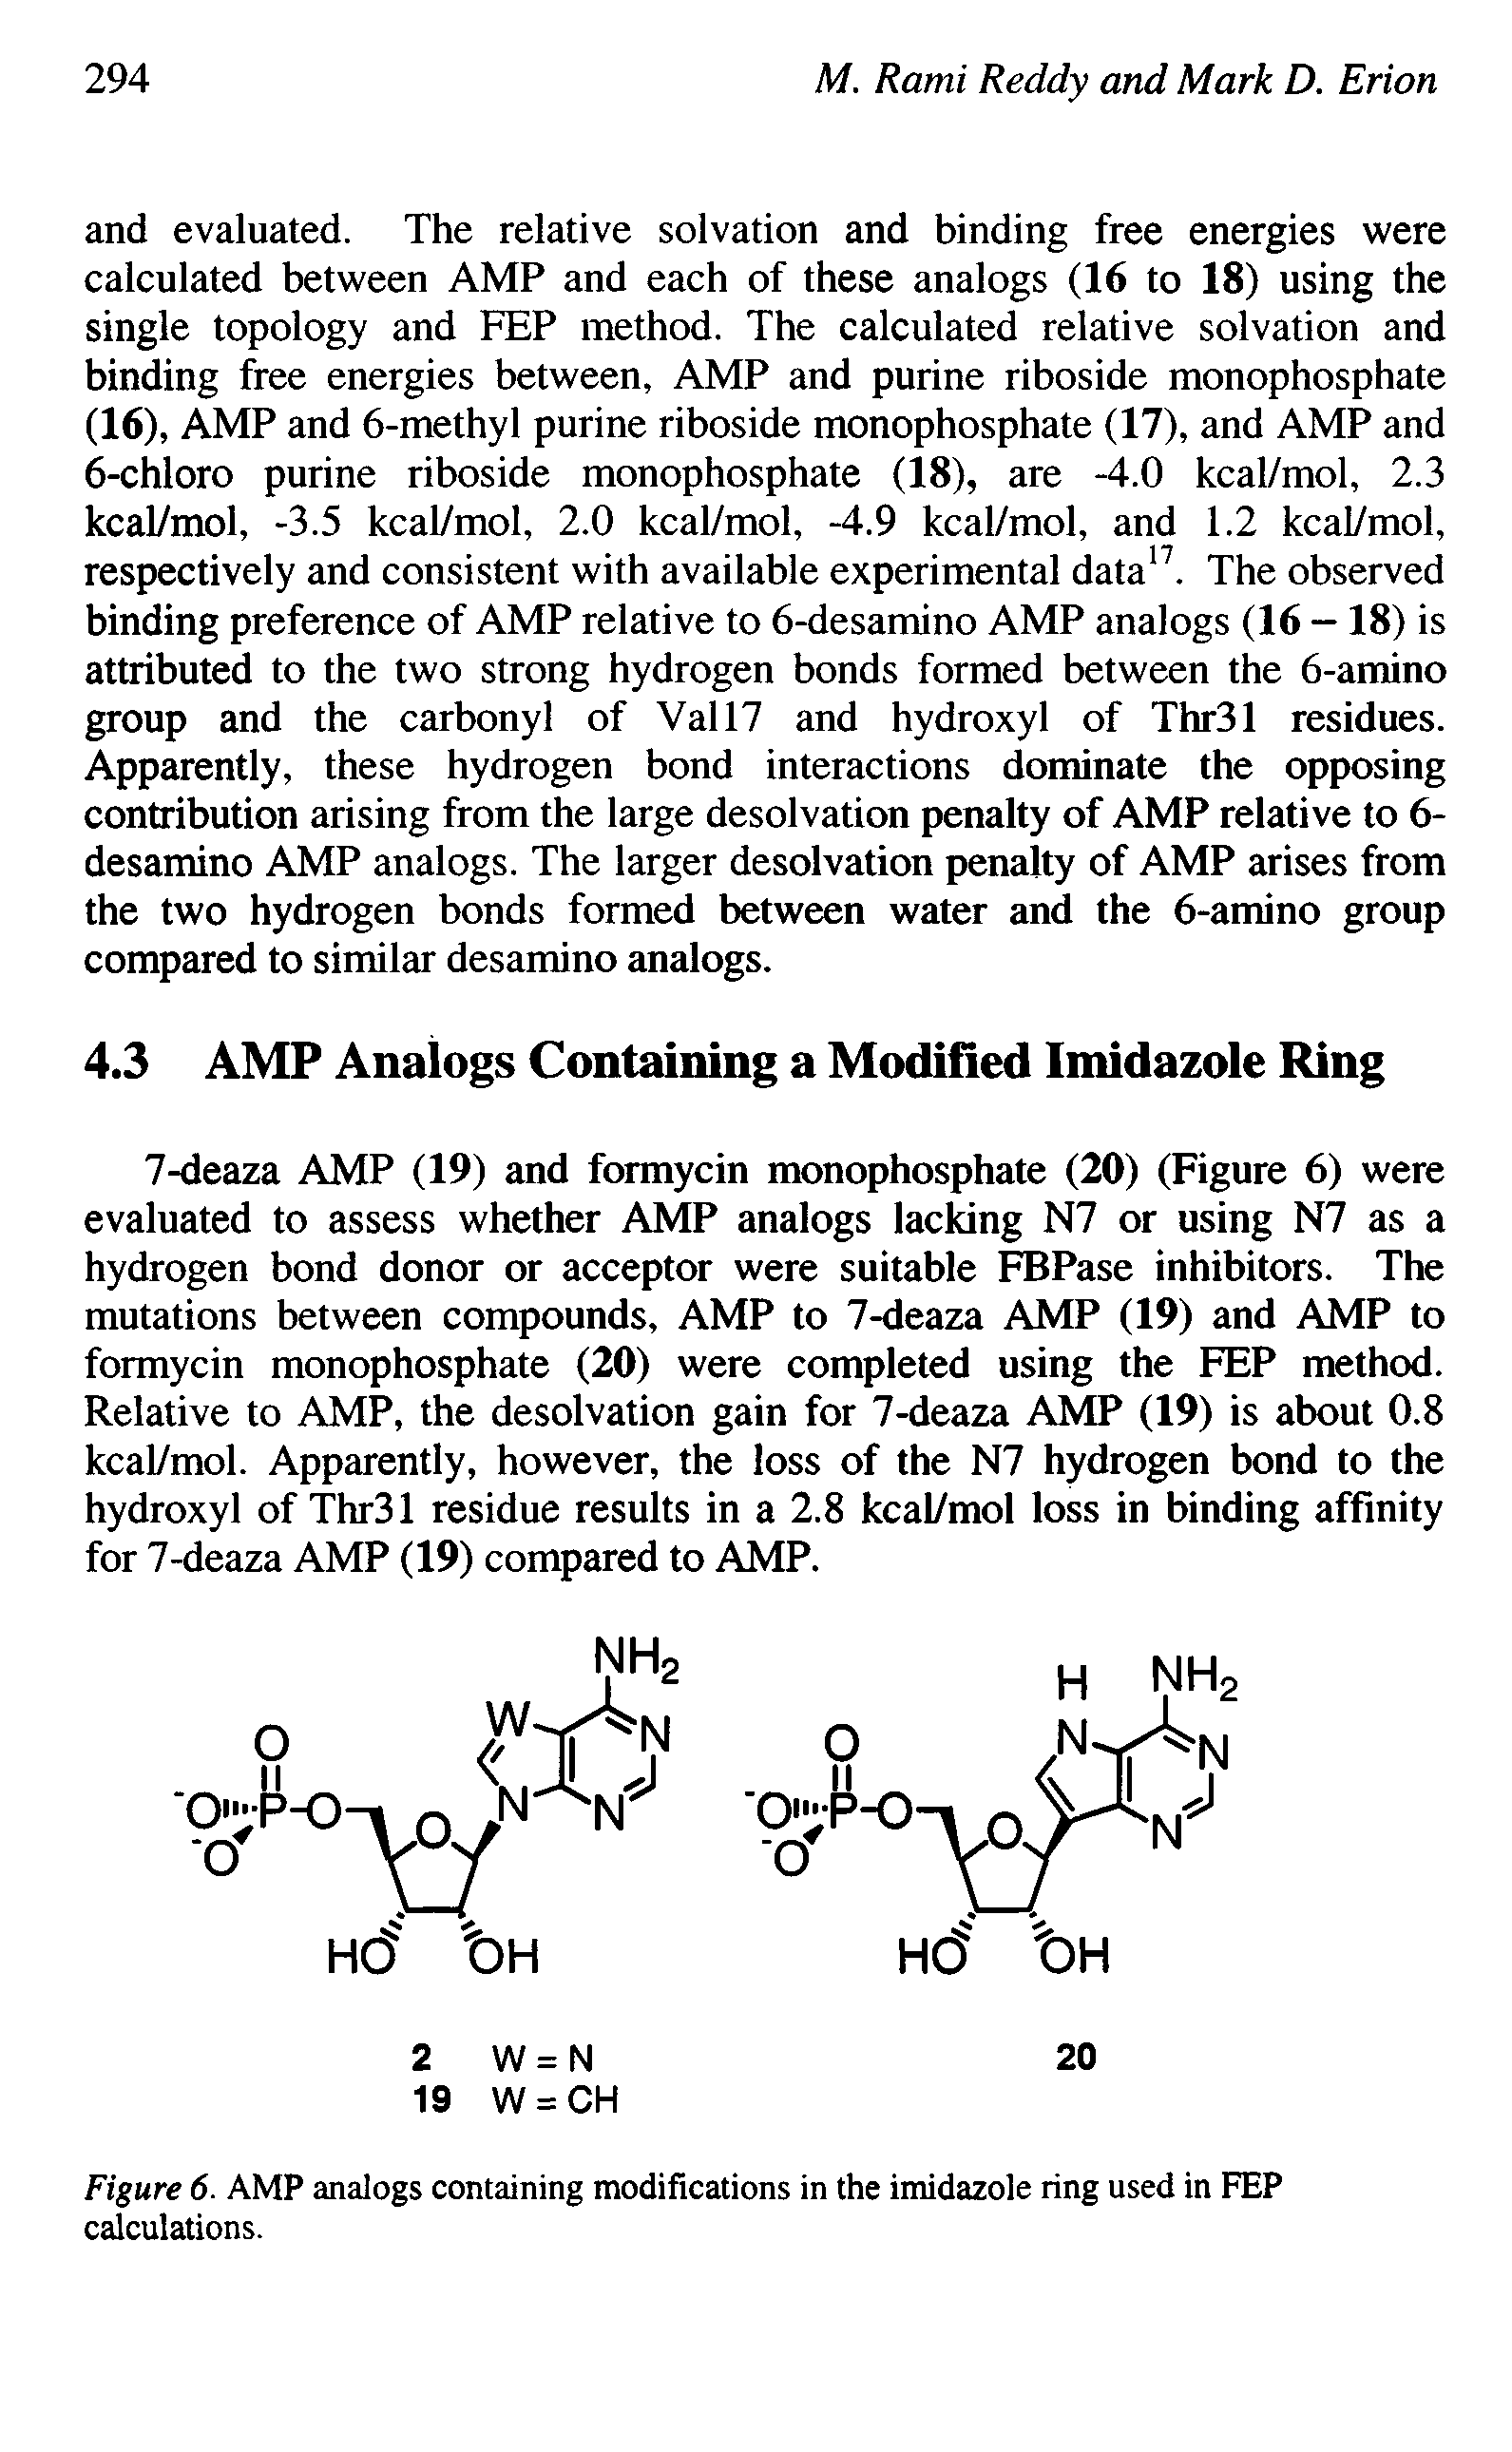 Figure 6. AMP analogs containing modifications in the imidazole ring used in FEP calculations.